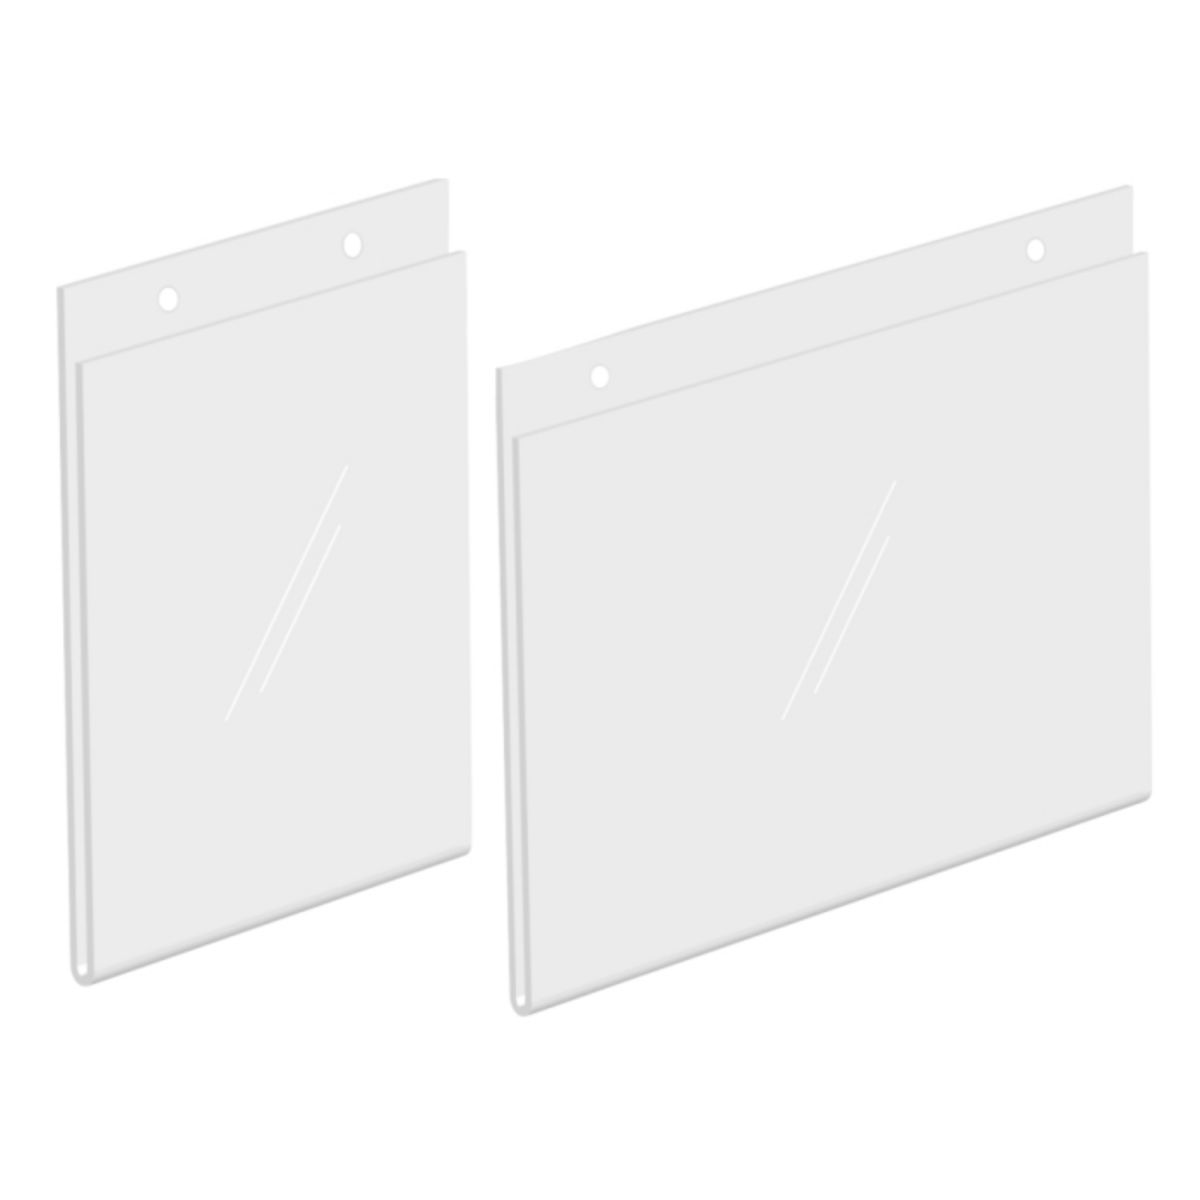 Acrylic poster holder in portrait and landscape.png